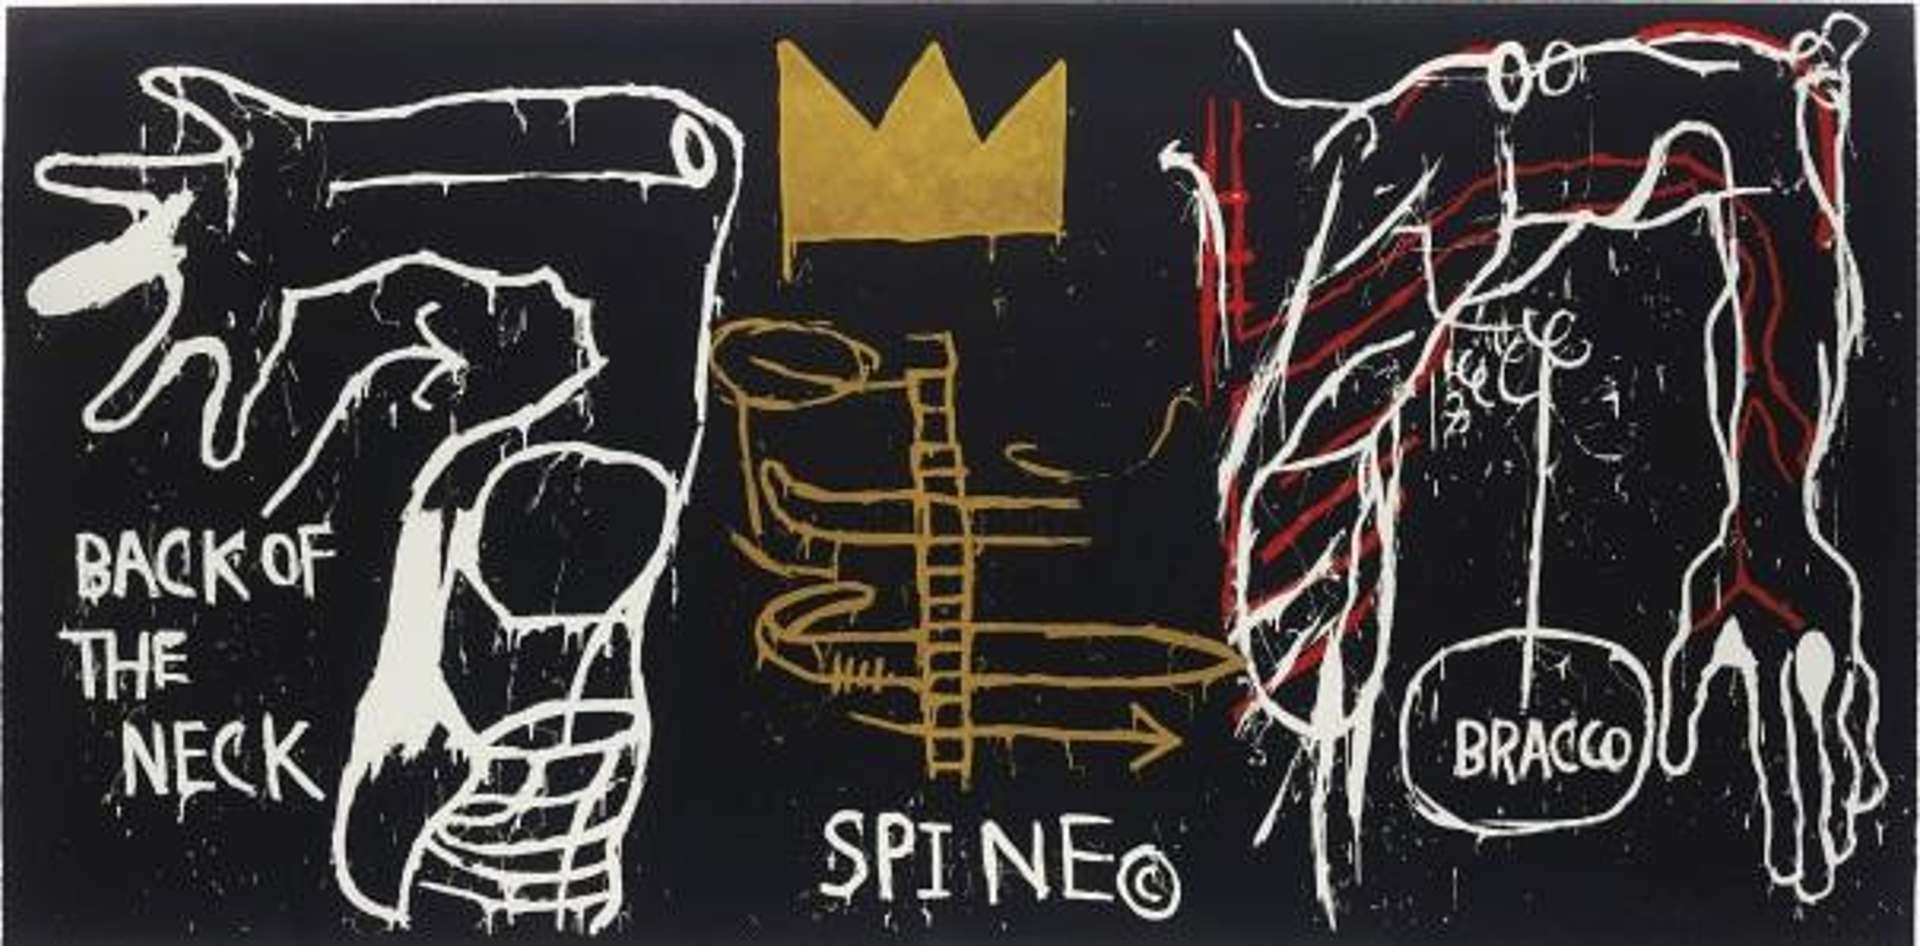 Back of the Neck by Jean-Michel Basquiat